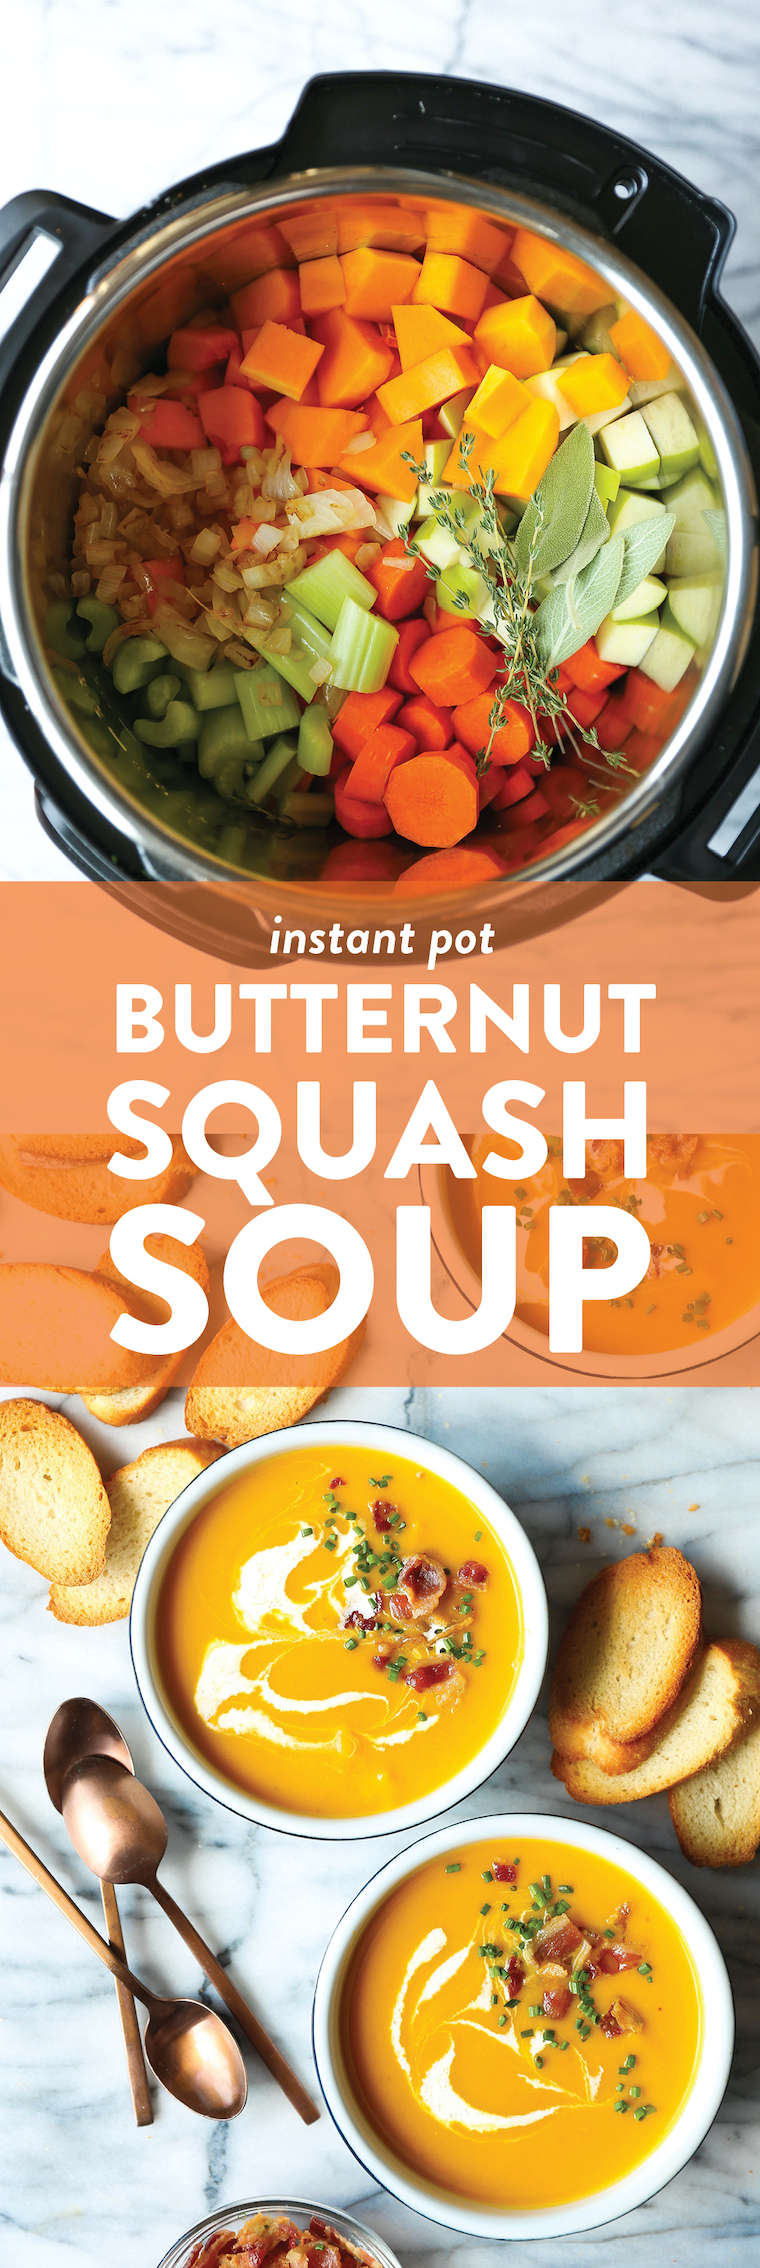 Instant Pot Butternut Squash Soup - Now you can make butternut squash soup in just half the time in the IP! Quick, easy, velvety smooth and so so cozy.